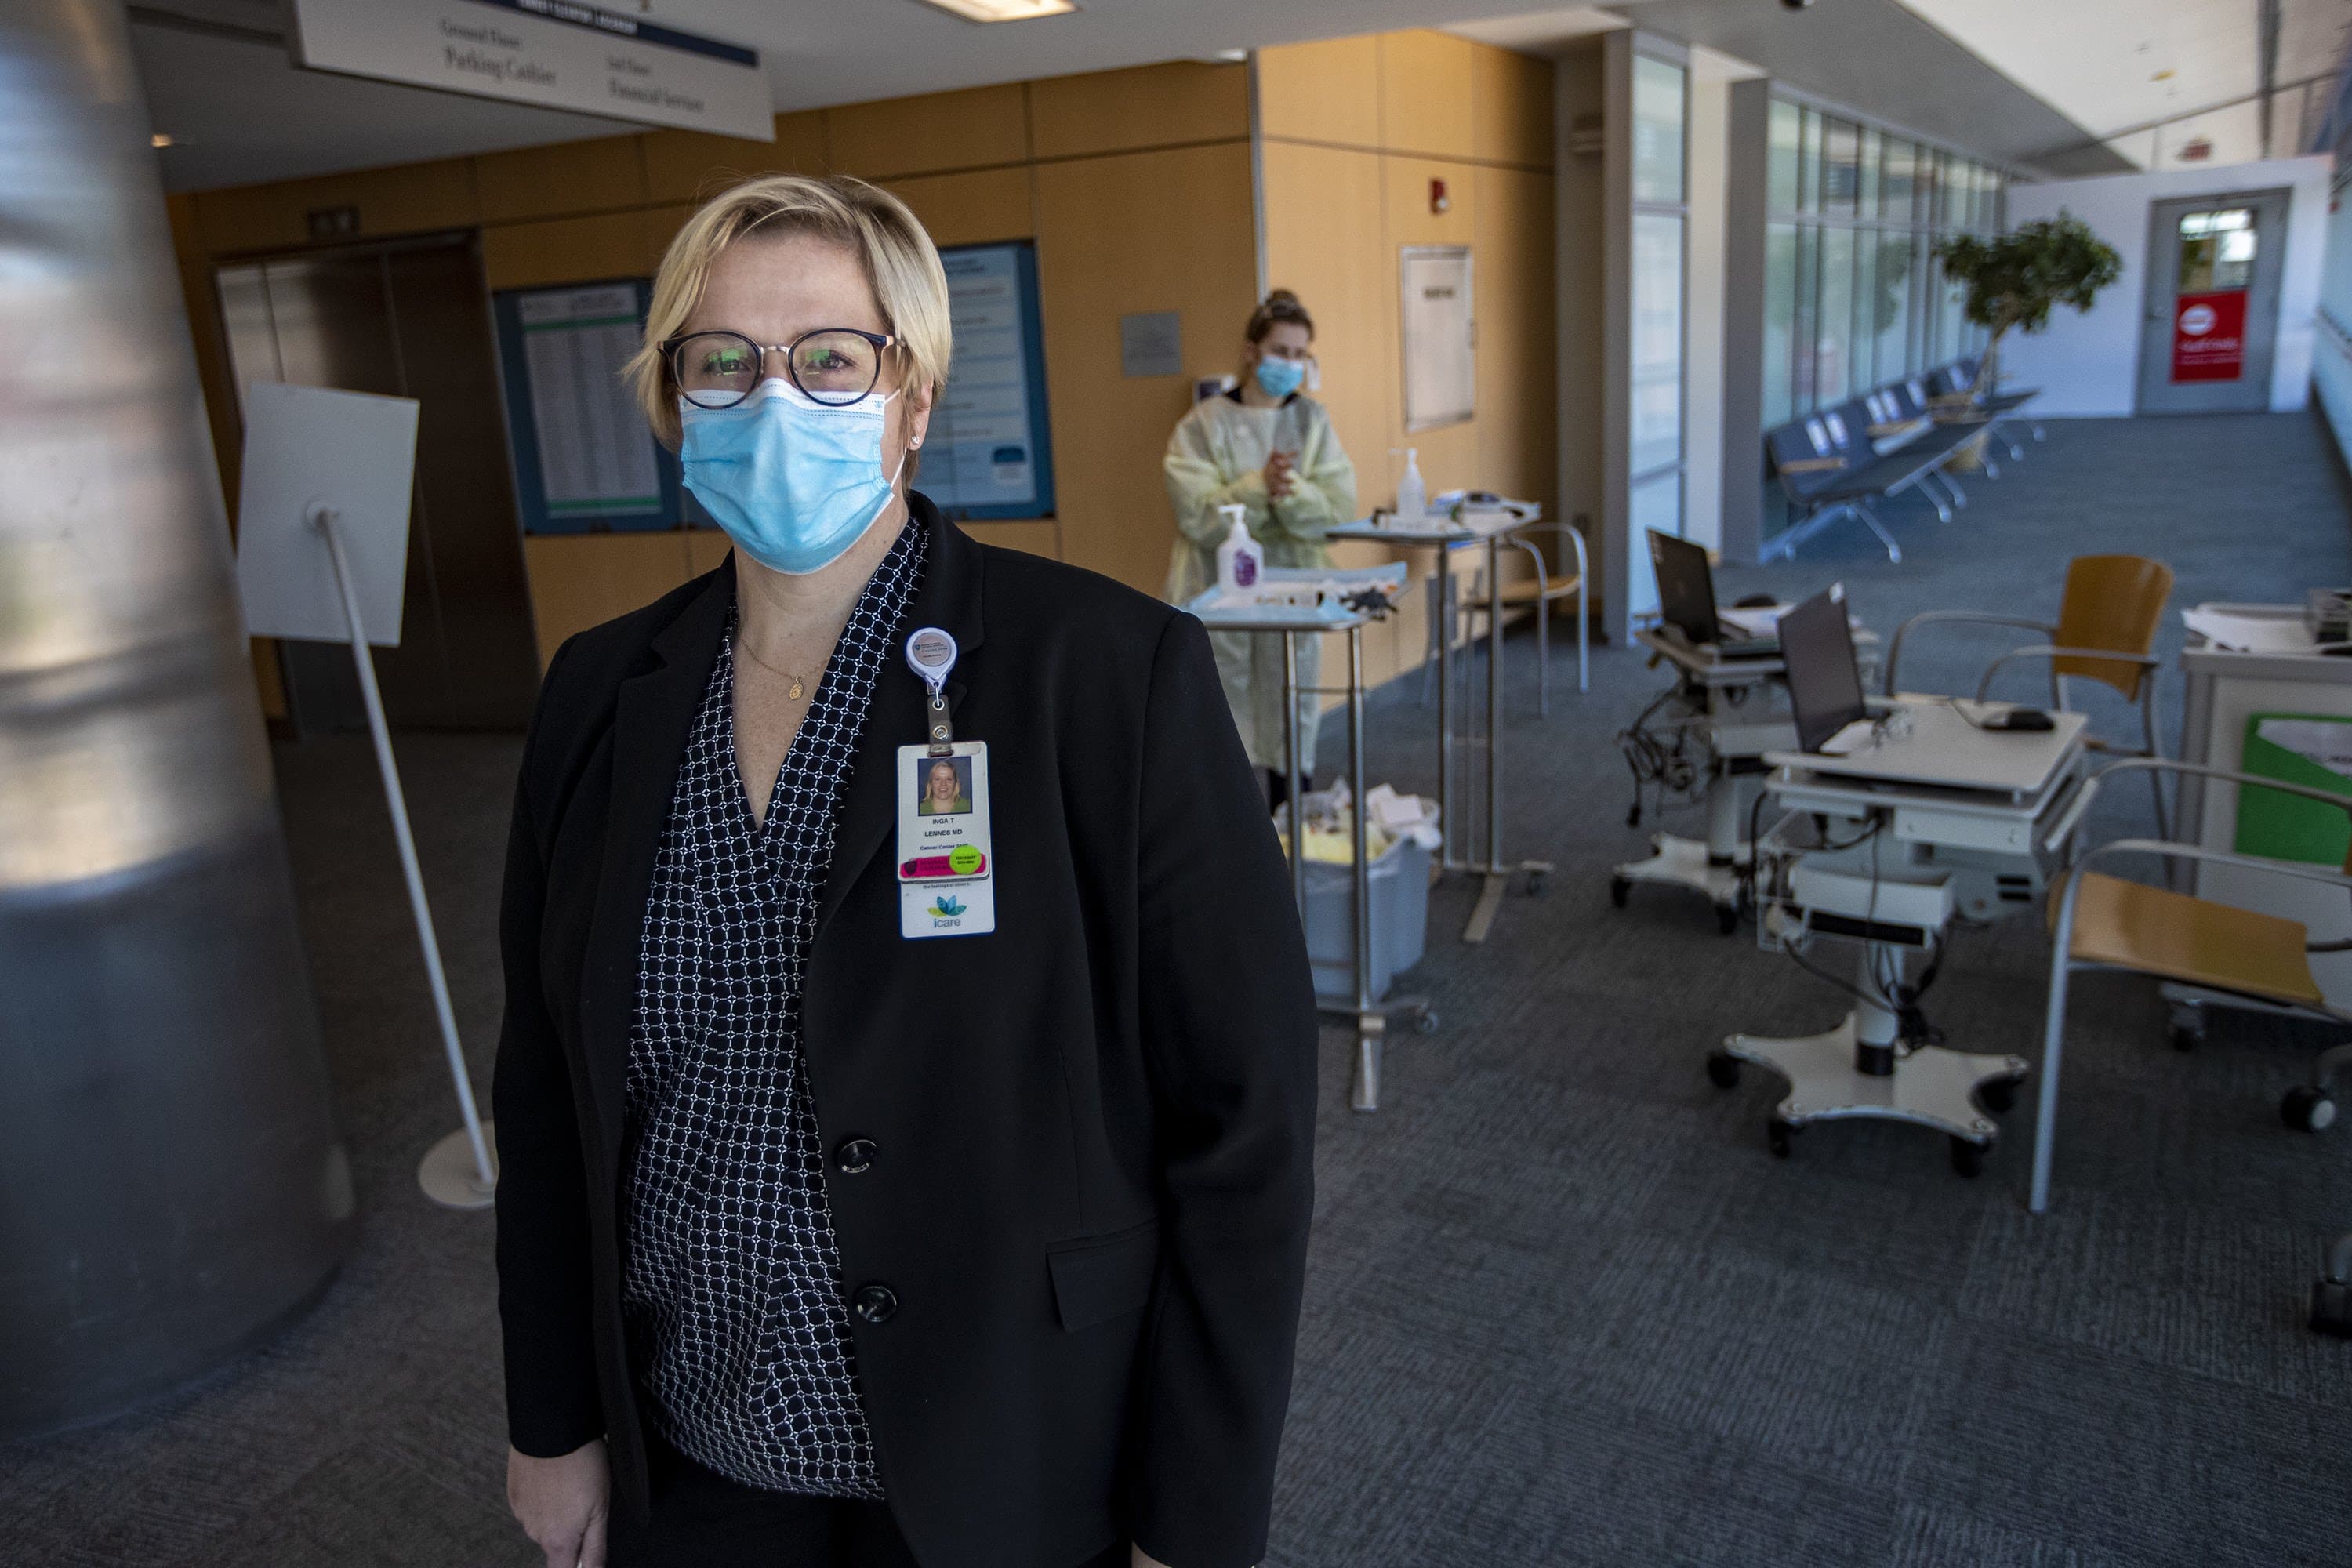 Dr. Inga Lennes stands in front of the screening area where patients temperatures are taken upon being admitted to Mass. General Hospital. (Jesse Costa/WBUR)